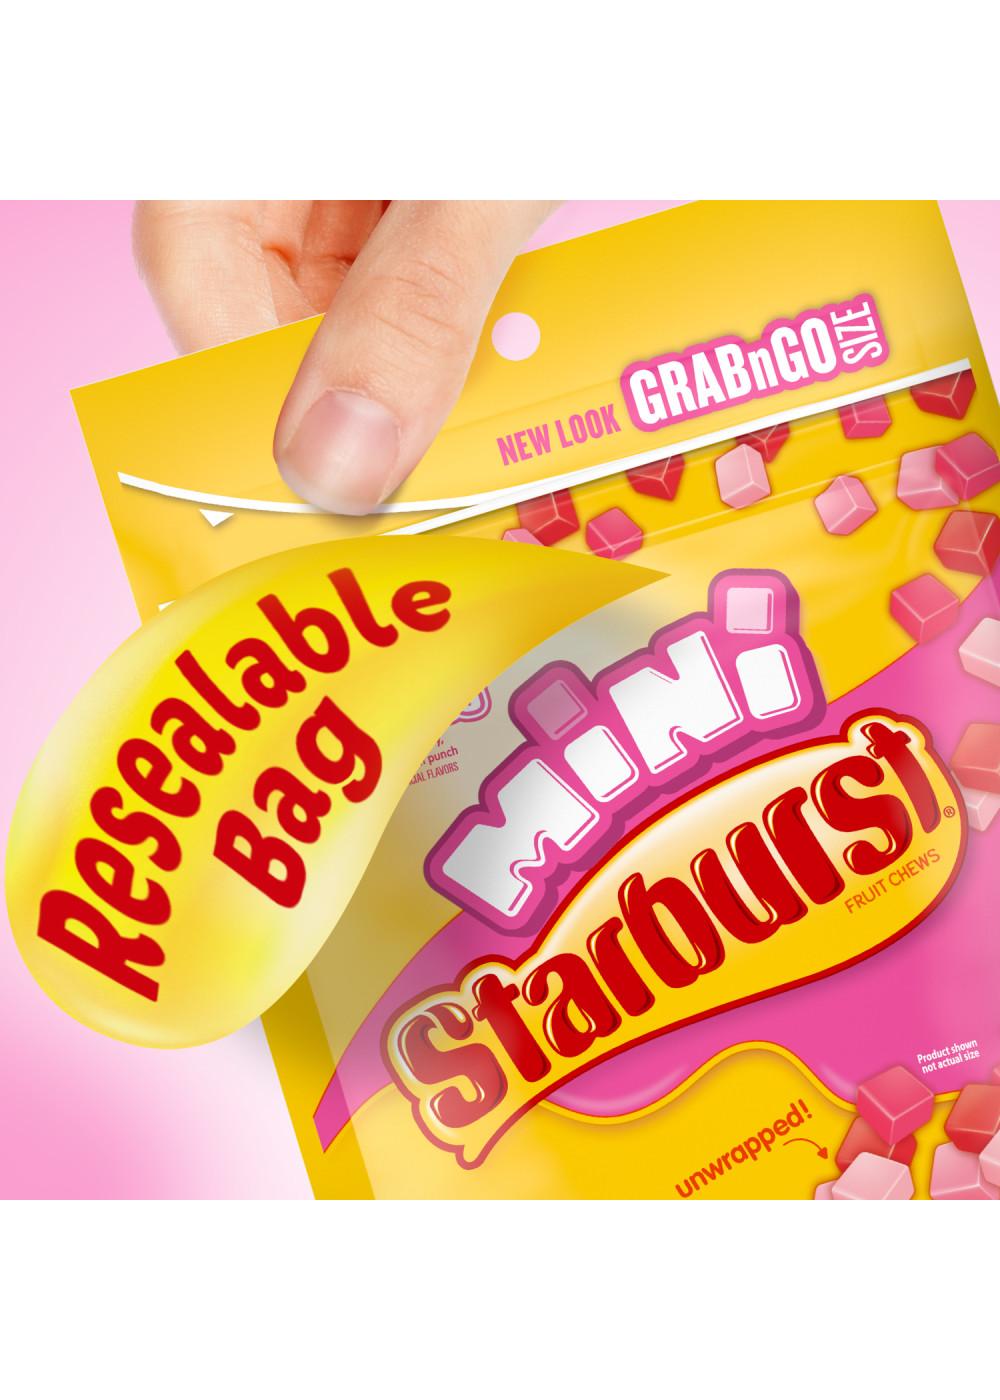 Starburst FaveReds Minis Chewy Candy - Grab & Go Size; image 3 of 5